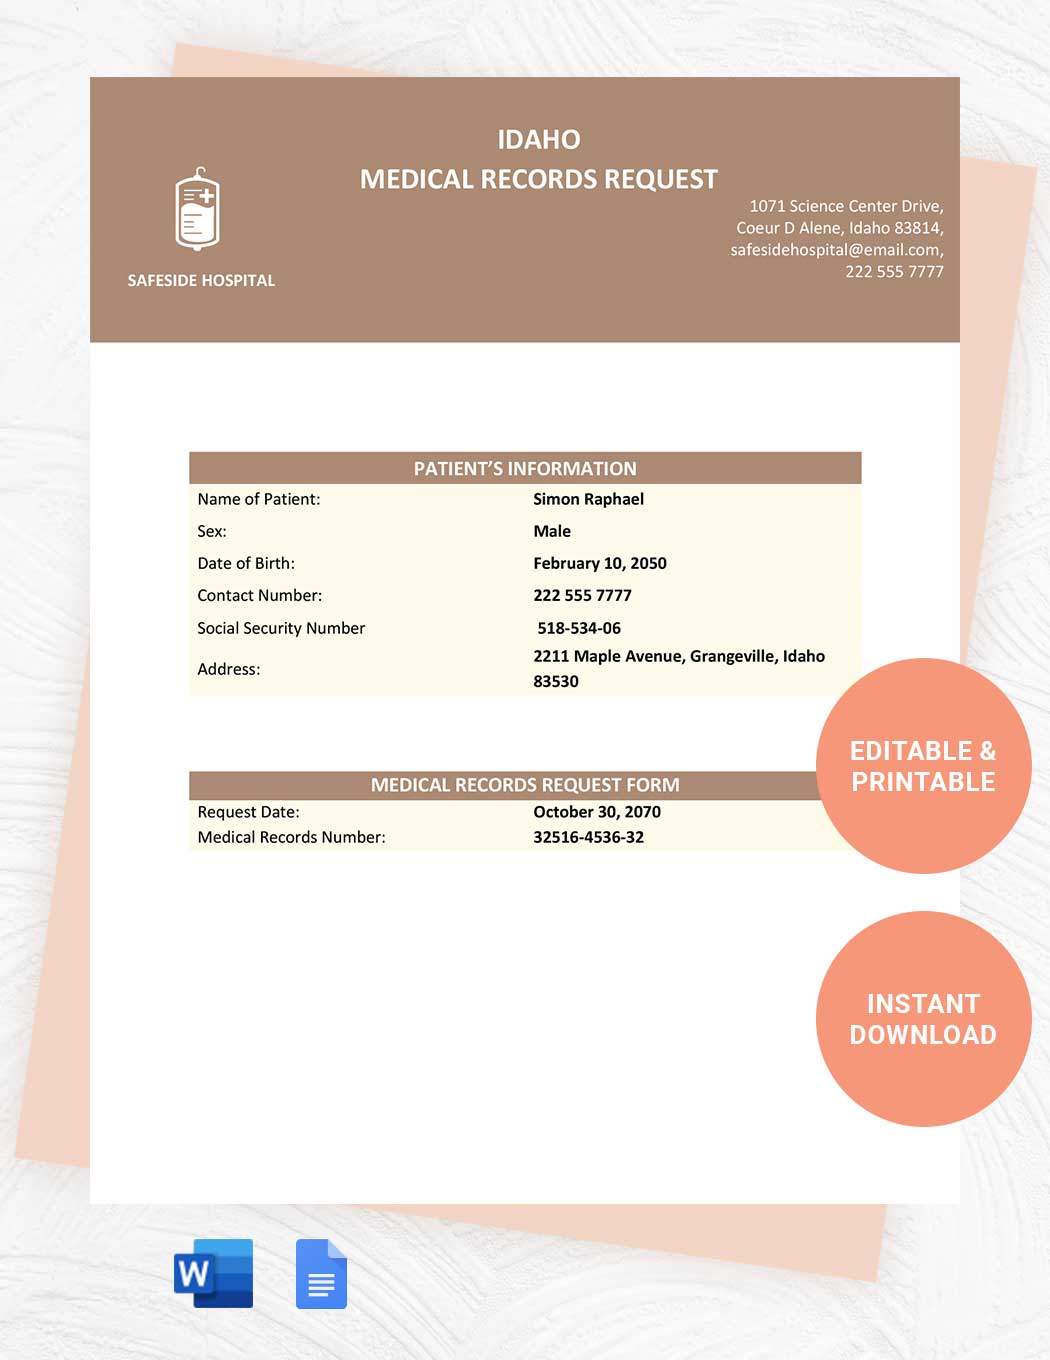 Idaho Medical Records Request Template in Word, Google Docs